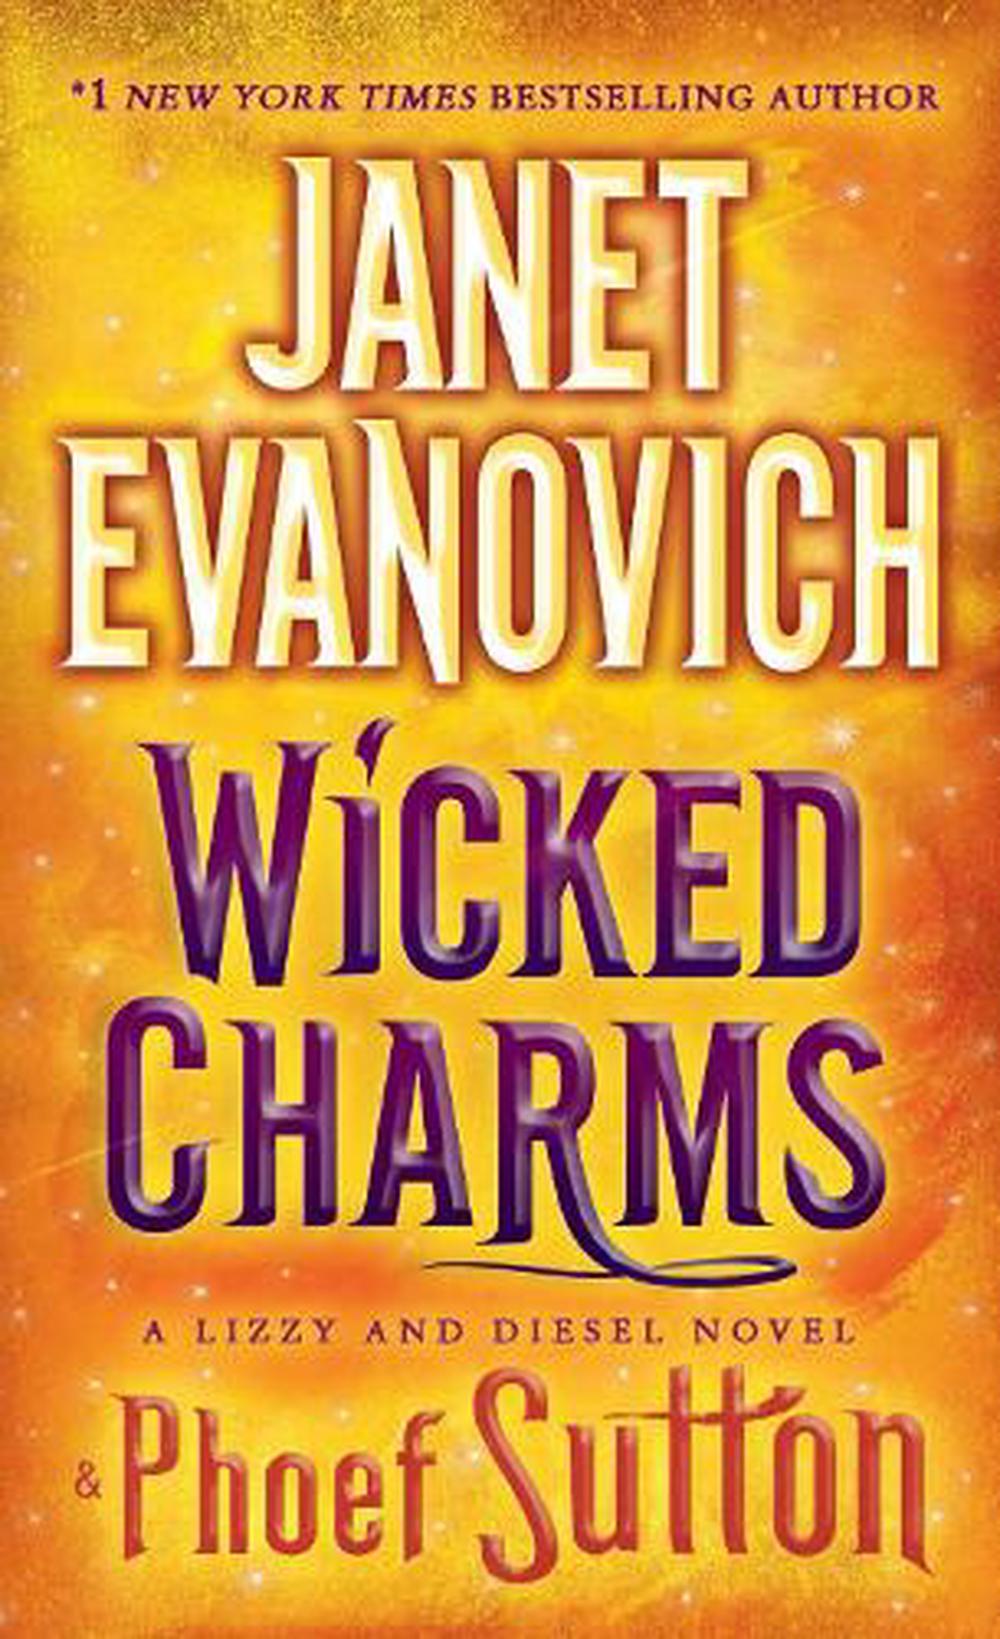 Lizzy & Diesel: Wicked Charms (Paperback) - image 1 of 1